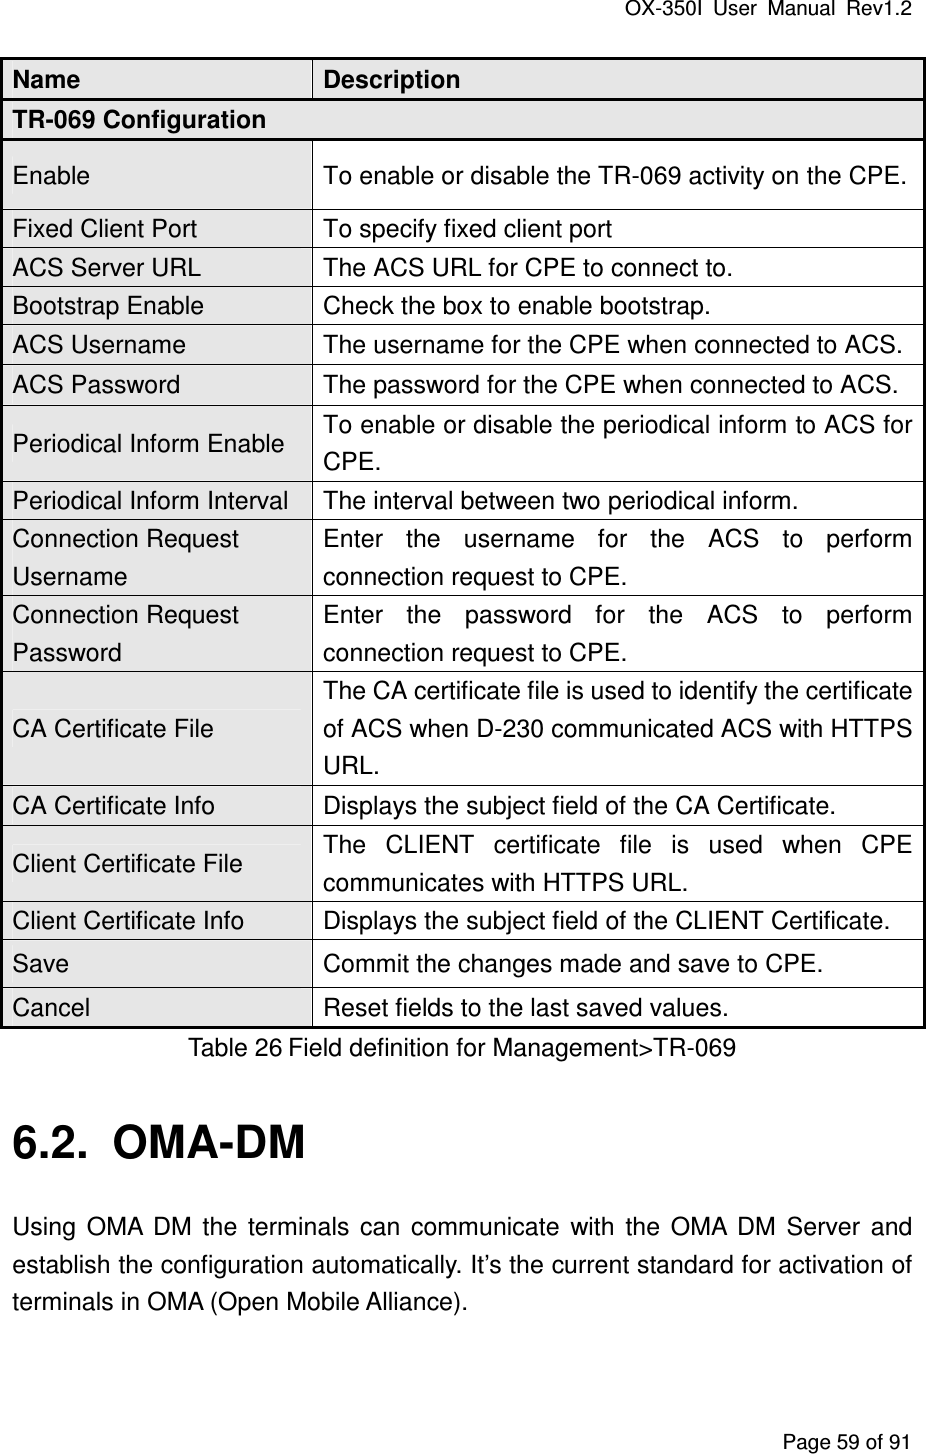 OX-350I  User  Manual  Rev1.2 Page 59 of 91 Name  Description TR-069 Configuration Enable  To enable or disable the TR-069 activity on the CPE. Fixed Client Port  To specify fixed client port ACS Server URL  The ACS URL for CPE to connect to. Bootstrap Enable  Check the box to enable bootstrap. ACS Username  The username for the CPE when connected to ACS. ACS Password  The password for the CPE when connected to ACS. Periodical Inform Enable  To enable or disable the periodical inform to ACS for CPE. Periodical Inform Interval  The interval between two periodical inform. Connection Request Username Enter  the  username  for  the  ACS  to  perform connection request to CPE. Connection Request Password Enter  the  password  for  the  ACS  to  perform connection request to CPE. CA Certificate File The CA certificate file is used to identify the certificate of ACS when D-230 communicated ACS with HTTPS URL. CA Certificate Info  Displays the subject field of the CA Certificate. Client Certificate File  The  CLIENT  certificate  file  is  used  when  CPE communicates with HTTPS URL. Client Certificate Info  Displays the subject field of the CLIENT Certificate. Save  Commit the changes made and save to CPE. Cancel  Reset fields to the last saved values. Table 26 Field definition for Management&gt;TR-069 6.2.  OMA-DM Using  OMA  DM  the  terminals  can  communicate  with  the  OMA  DM  Server  and establish the configuration automatically. It’s the current standard for activation of terminals in OMA (Open Mobile Alliance). 